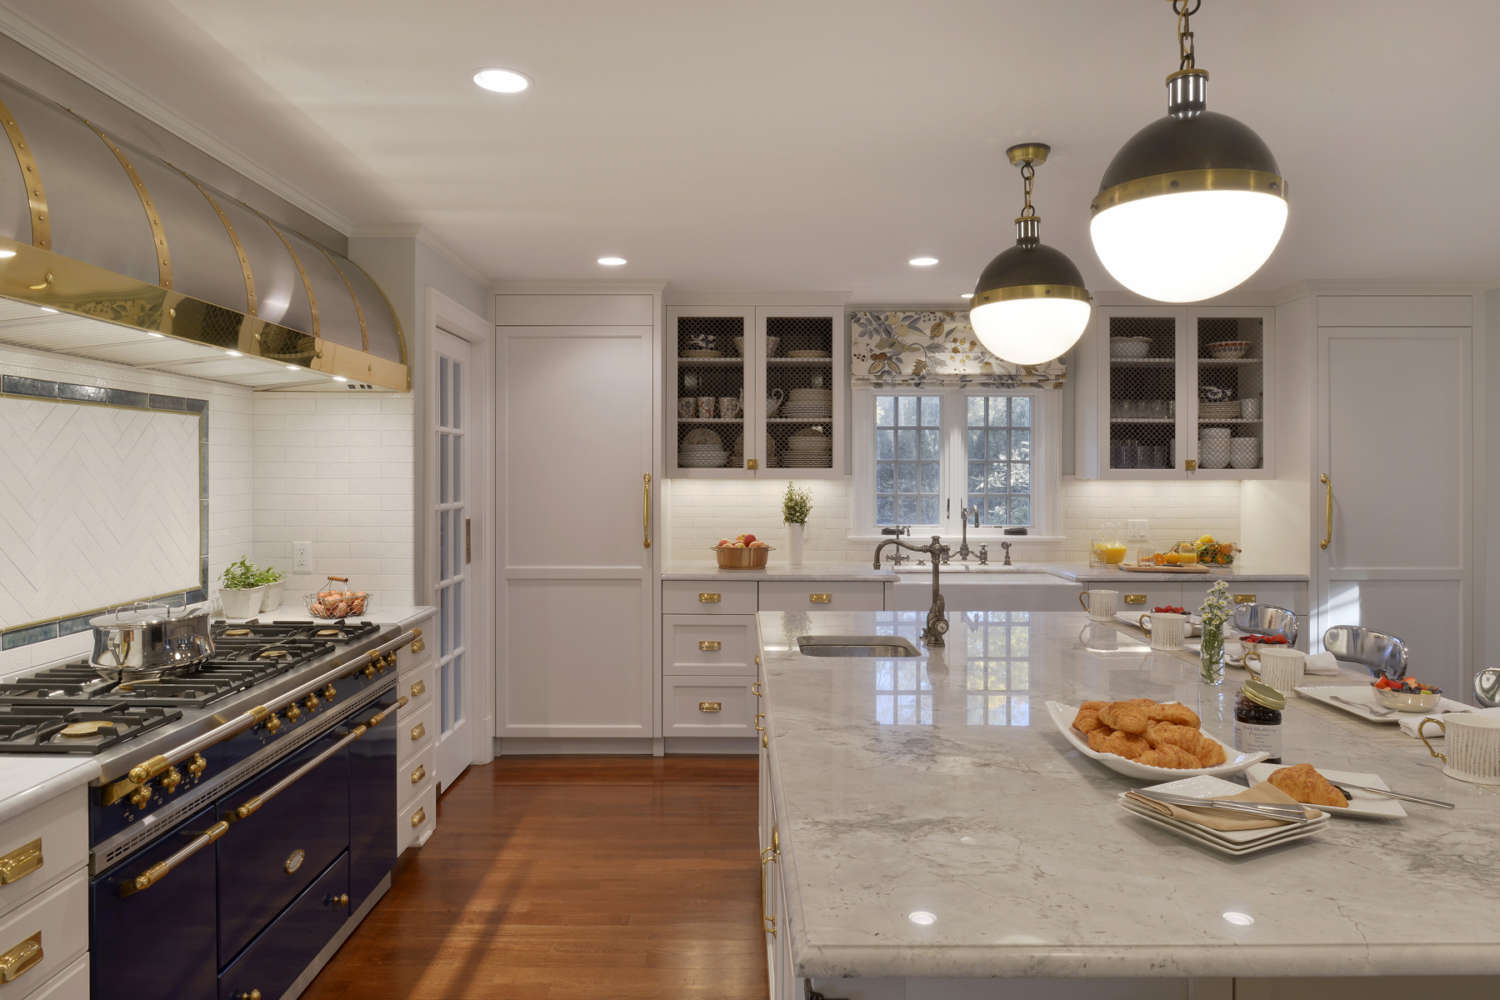 Expansive double island Scarsdale NY kitchen features marble topped center island and Bilotta cabinetry in Paperwhite with brass hardware.